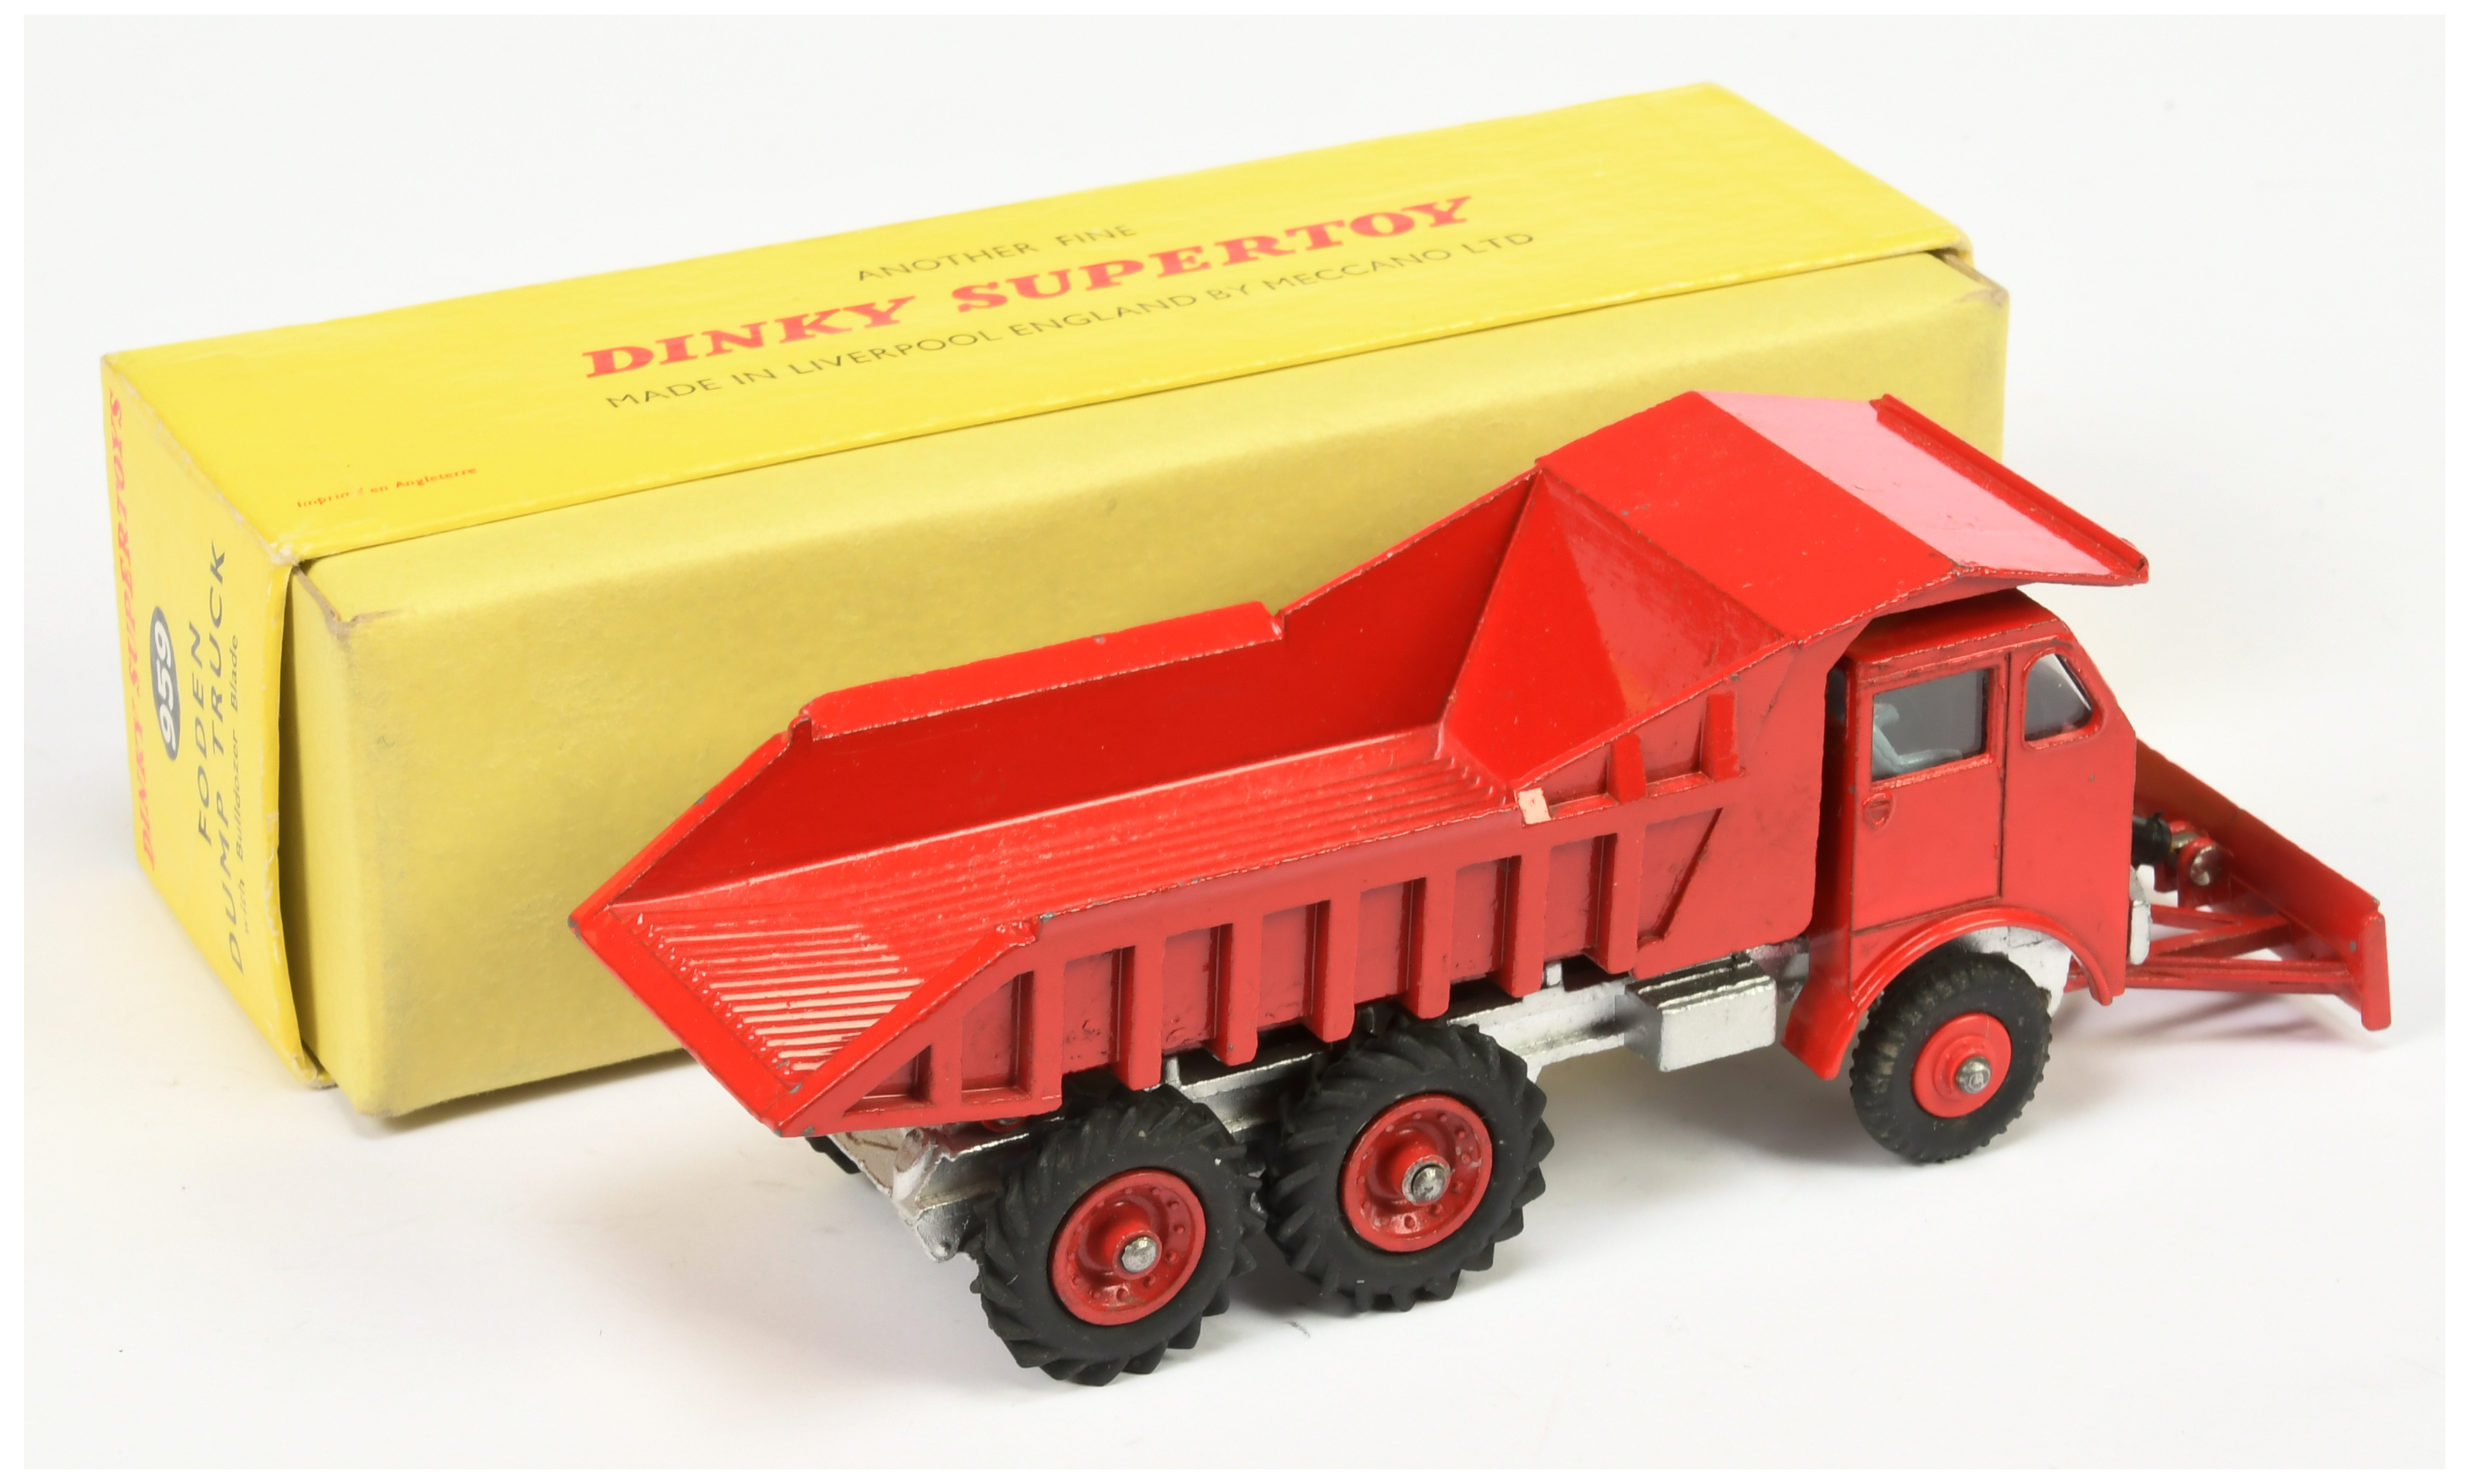 Dinky Toys 959 Foden Dump Truck With Bulldozer Blade - Red Cab, tipping back and hubs (plastic to... - Bild 2 aus 2